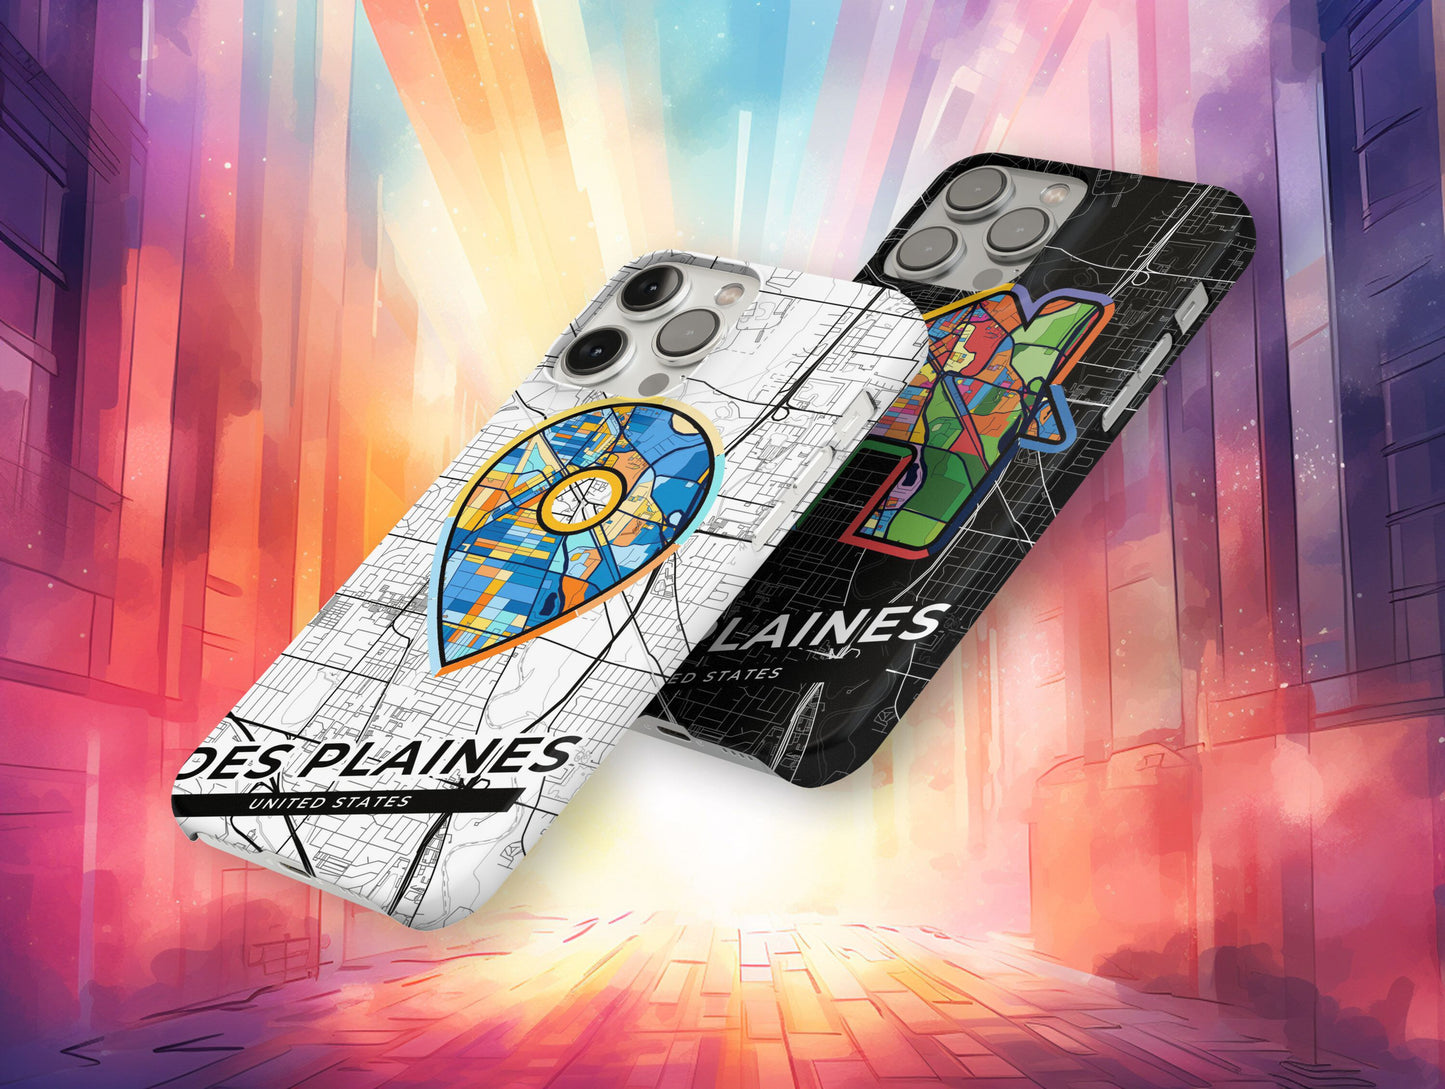 Des Plaines Illinois slim phone case with colorful icon. Birthday, wedding or housewarming gift. Couple match cases.